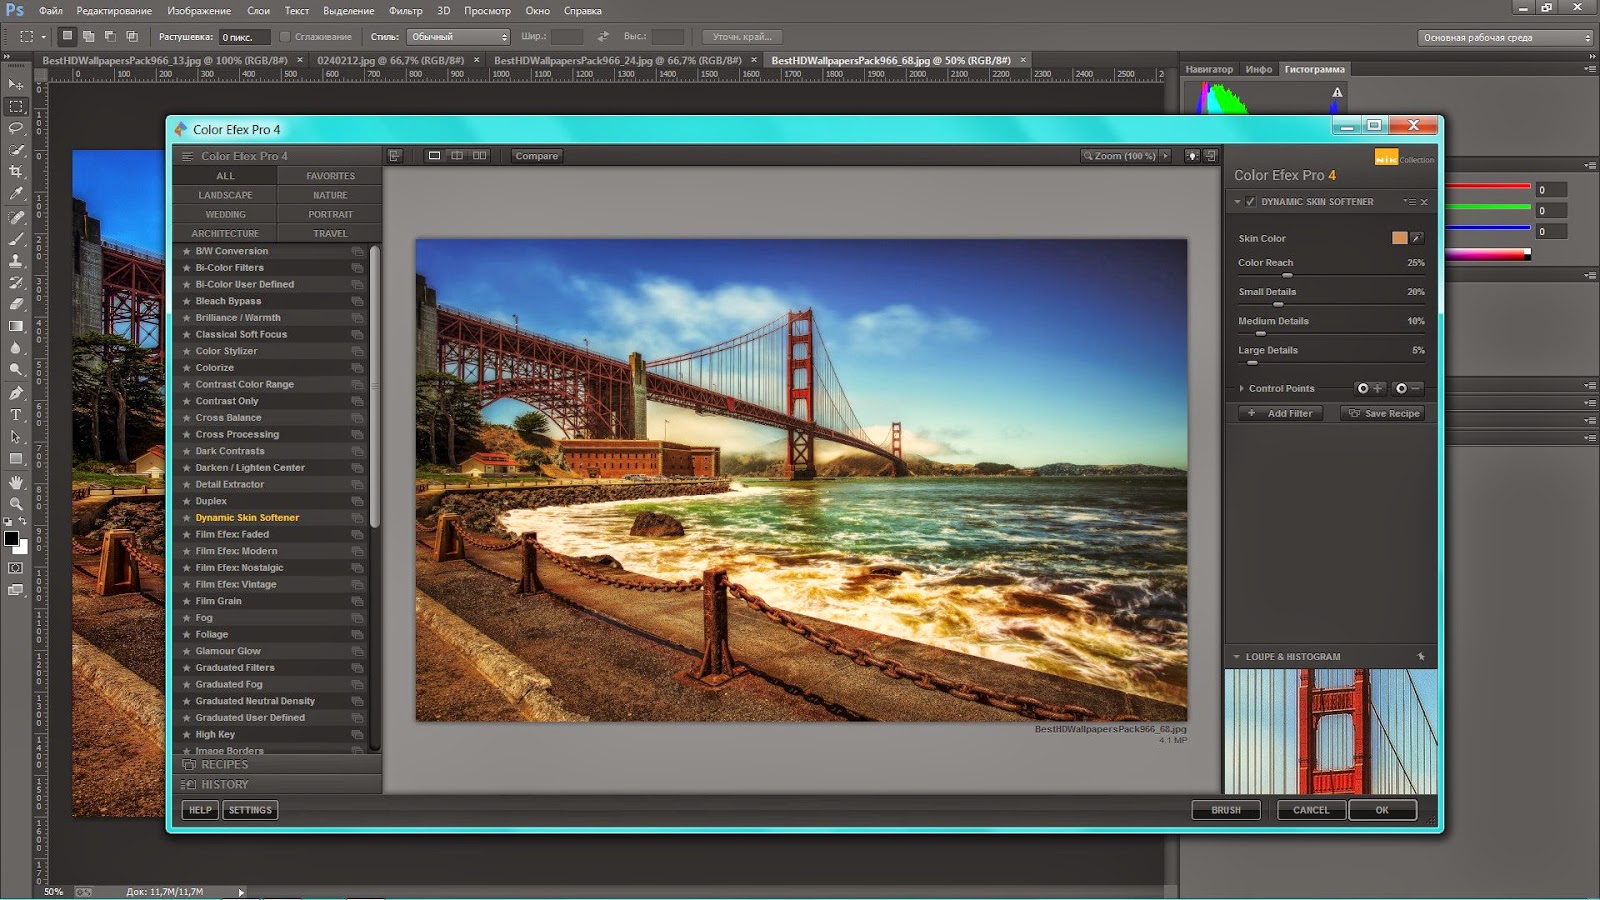 adobe photoshop cc 2015 with crack download